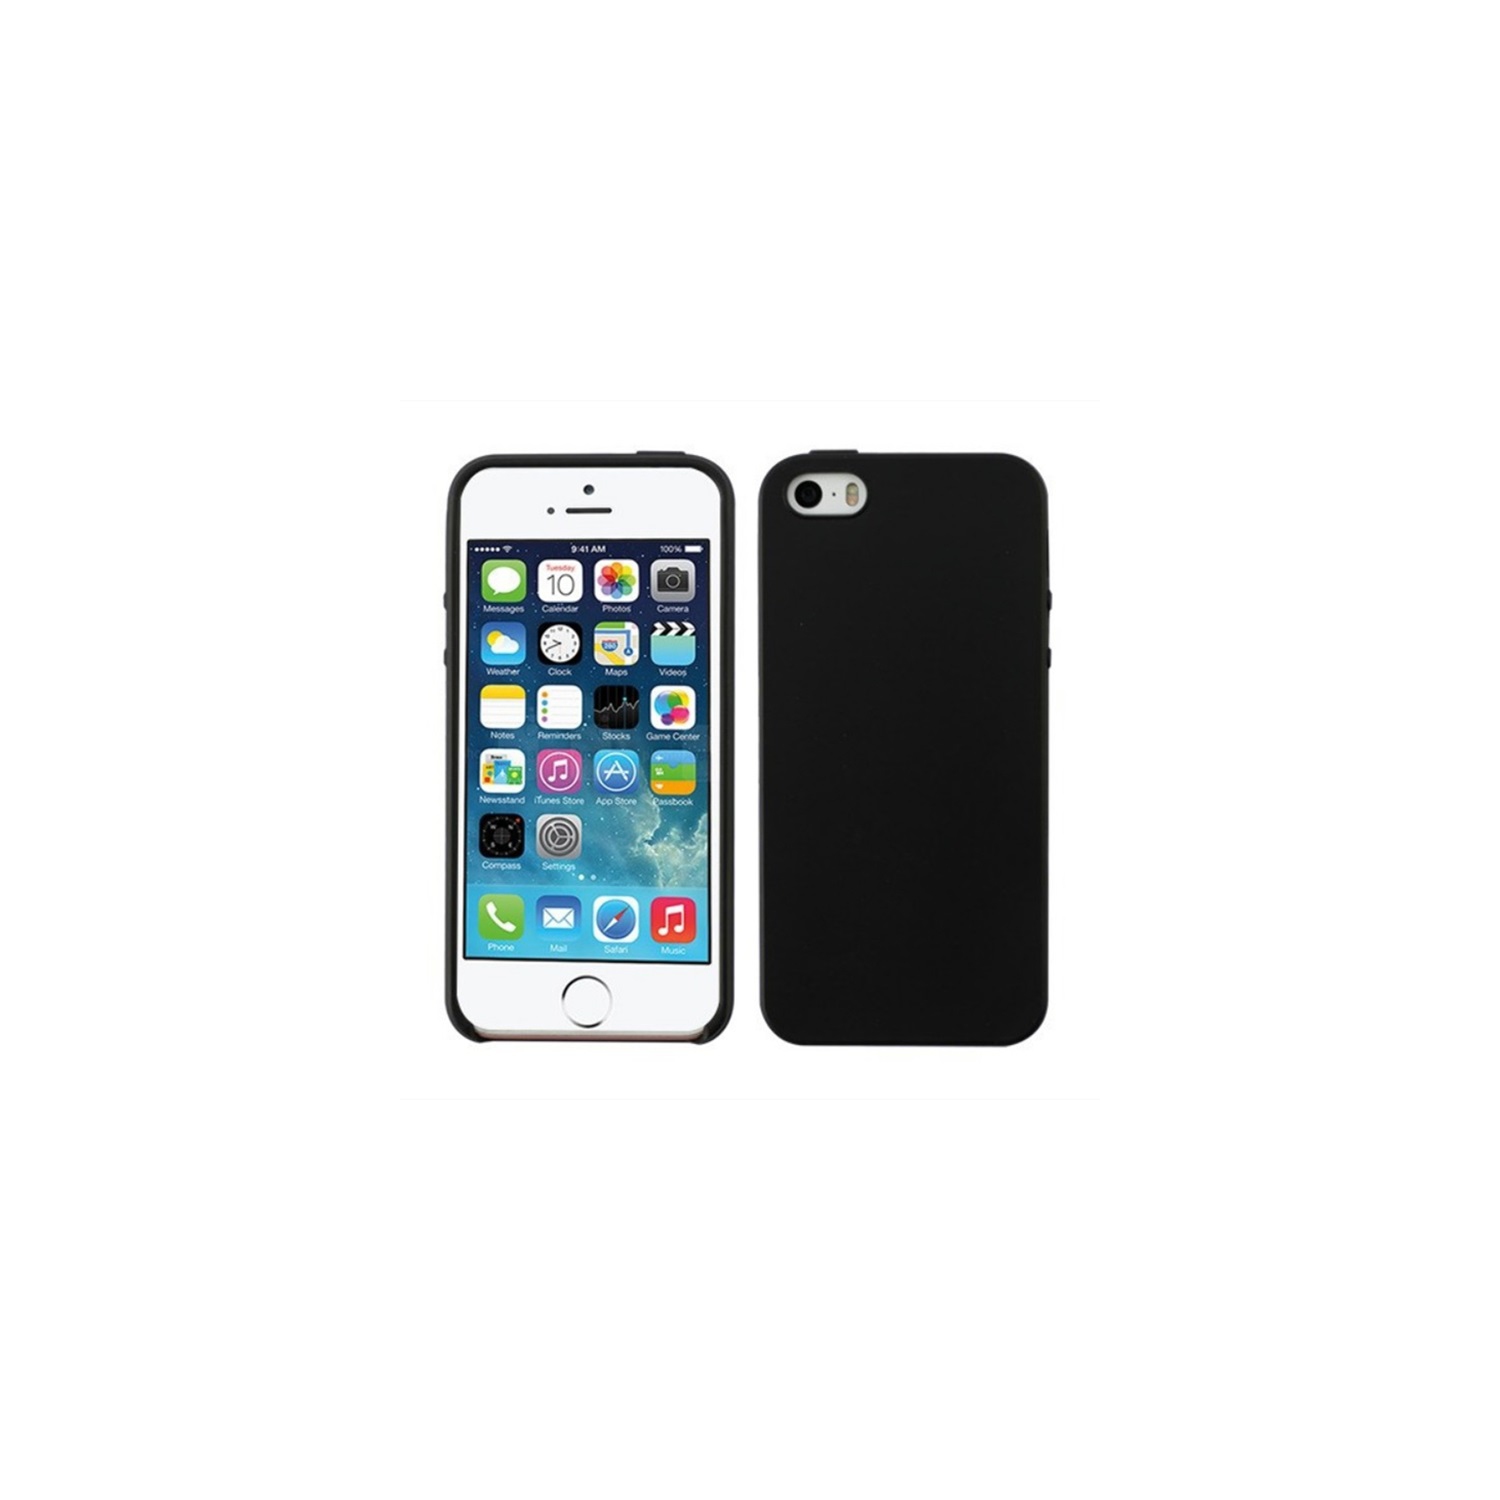 【CSmart】 Ultra Thin Soft TPU Silicone Jelly Bumper Back Cover Case for iPhone 6 & 6S (4.7"), Transparent Black